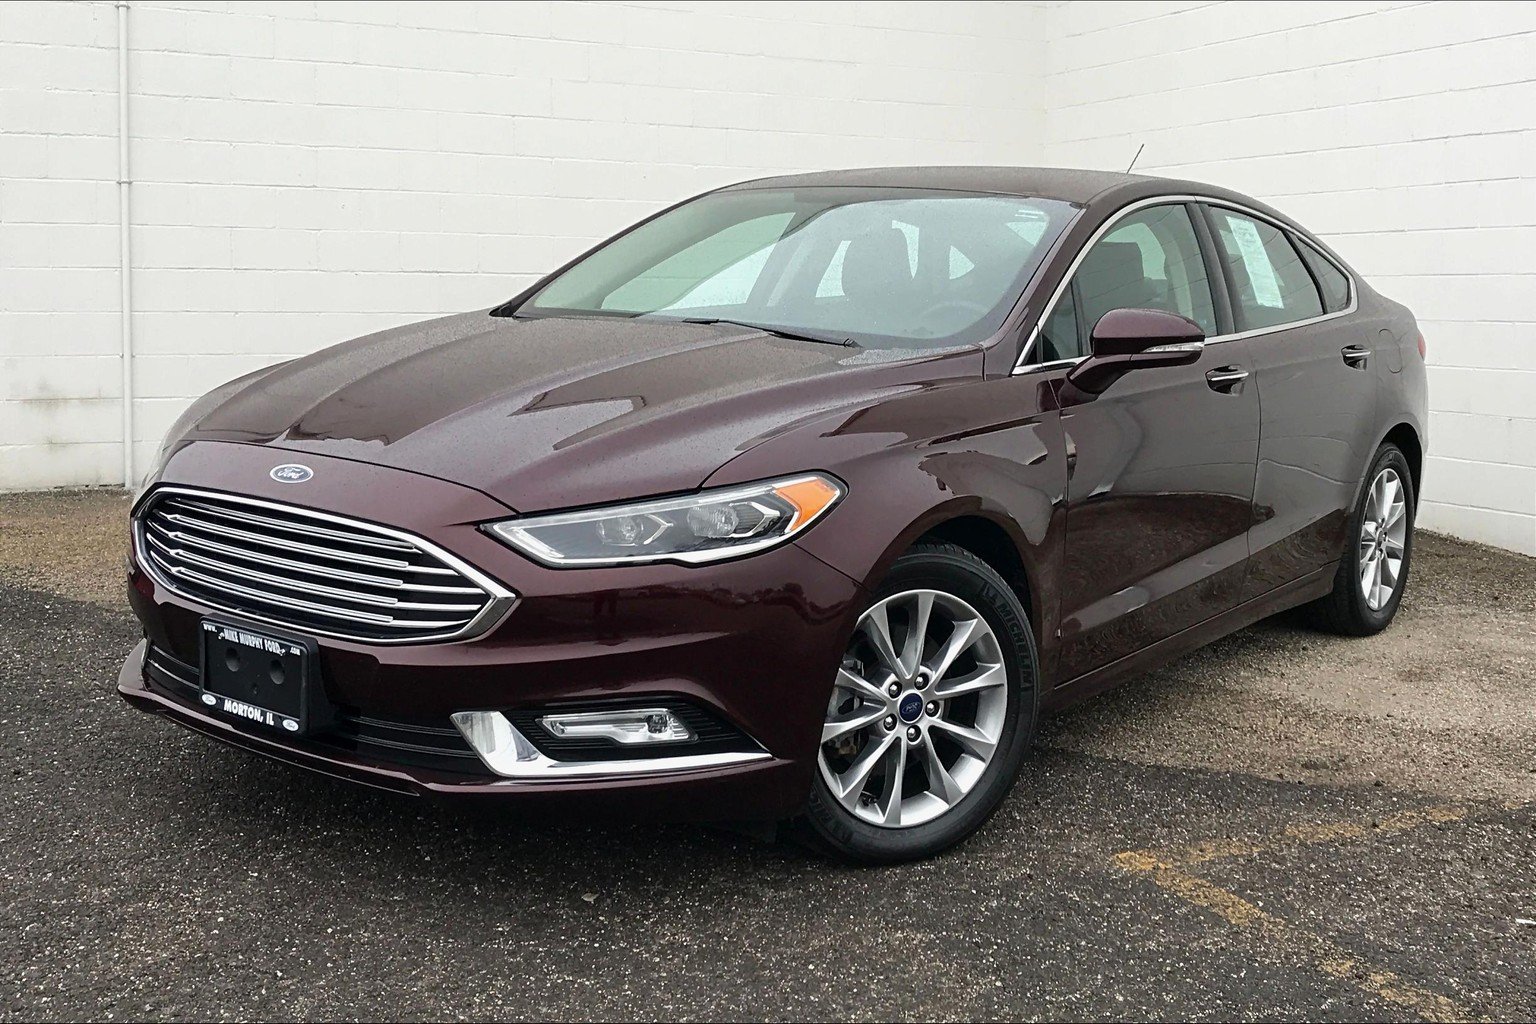 2017 ford fusion 120 volt outlet